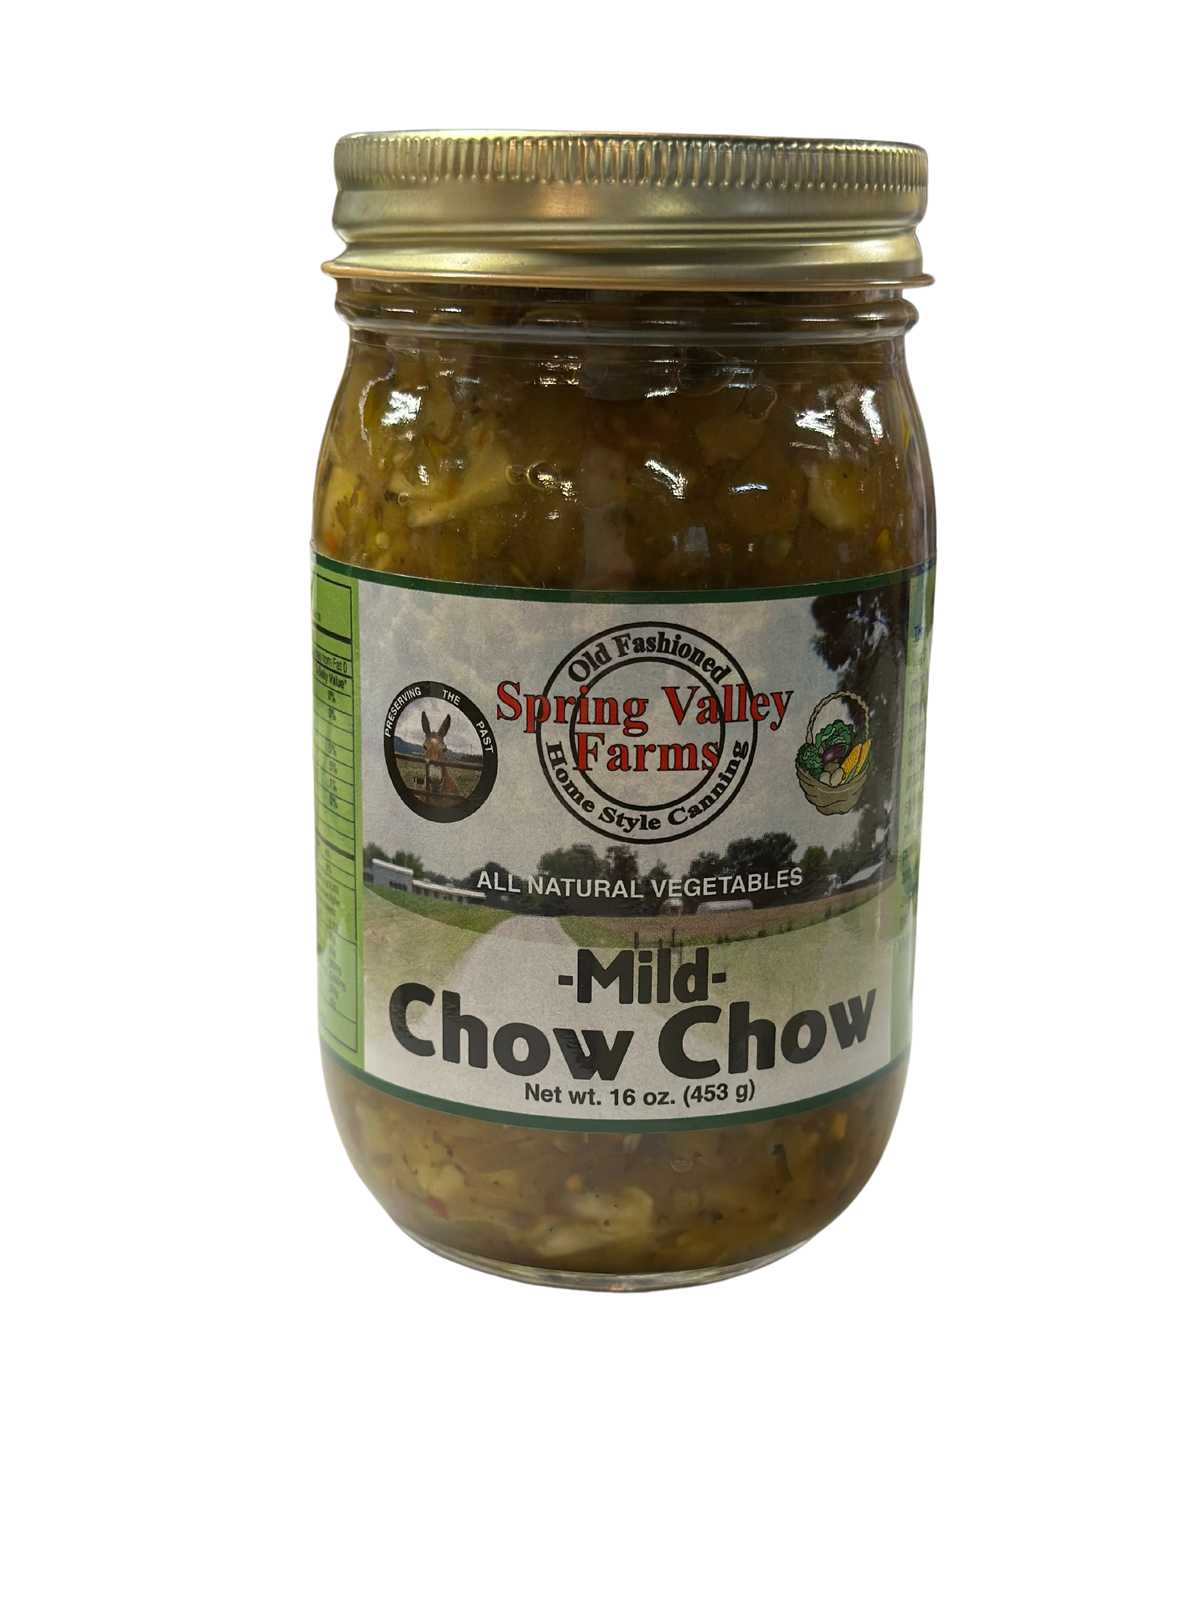 Spring Valley Farms Mild Chow Chow